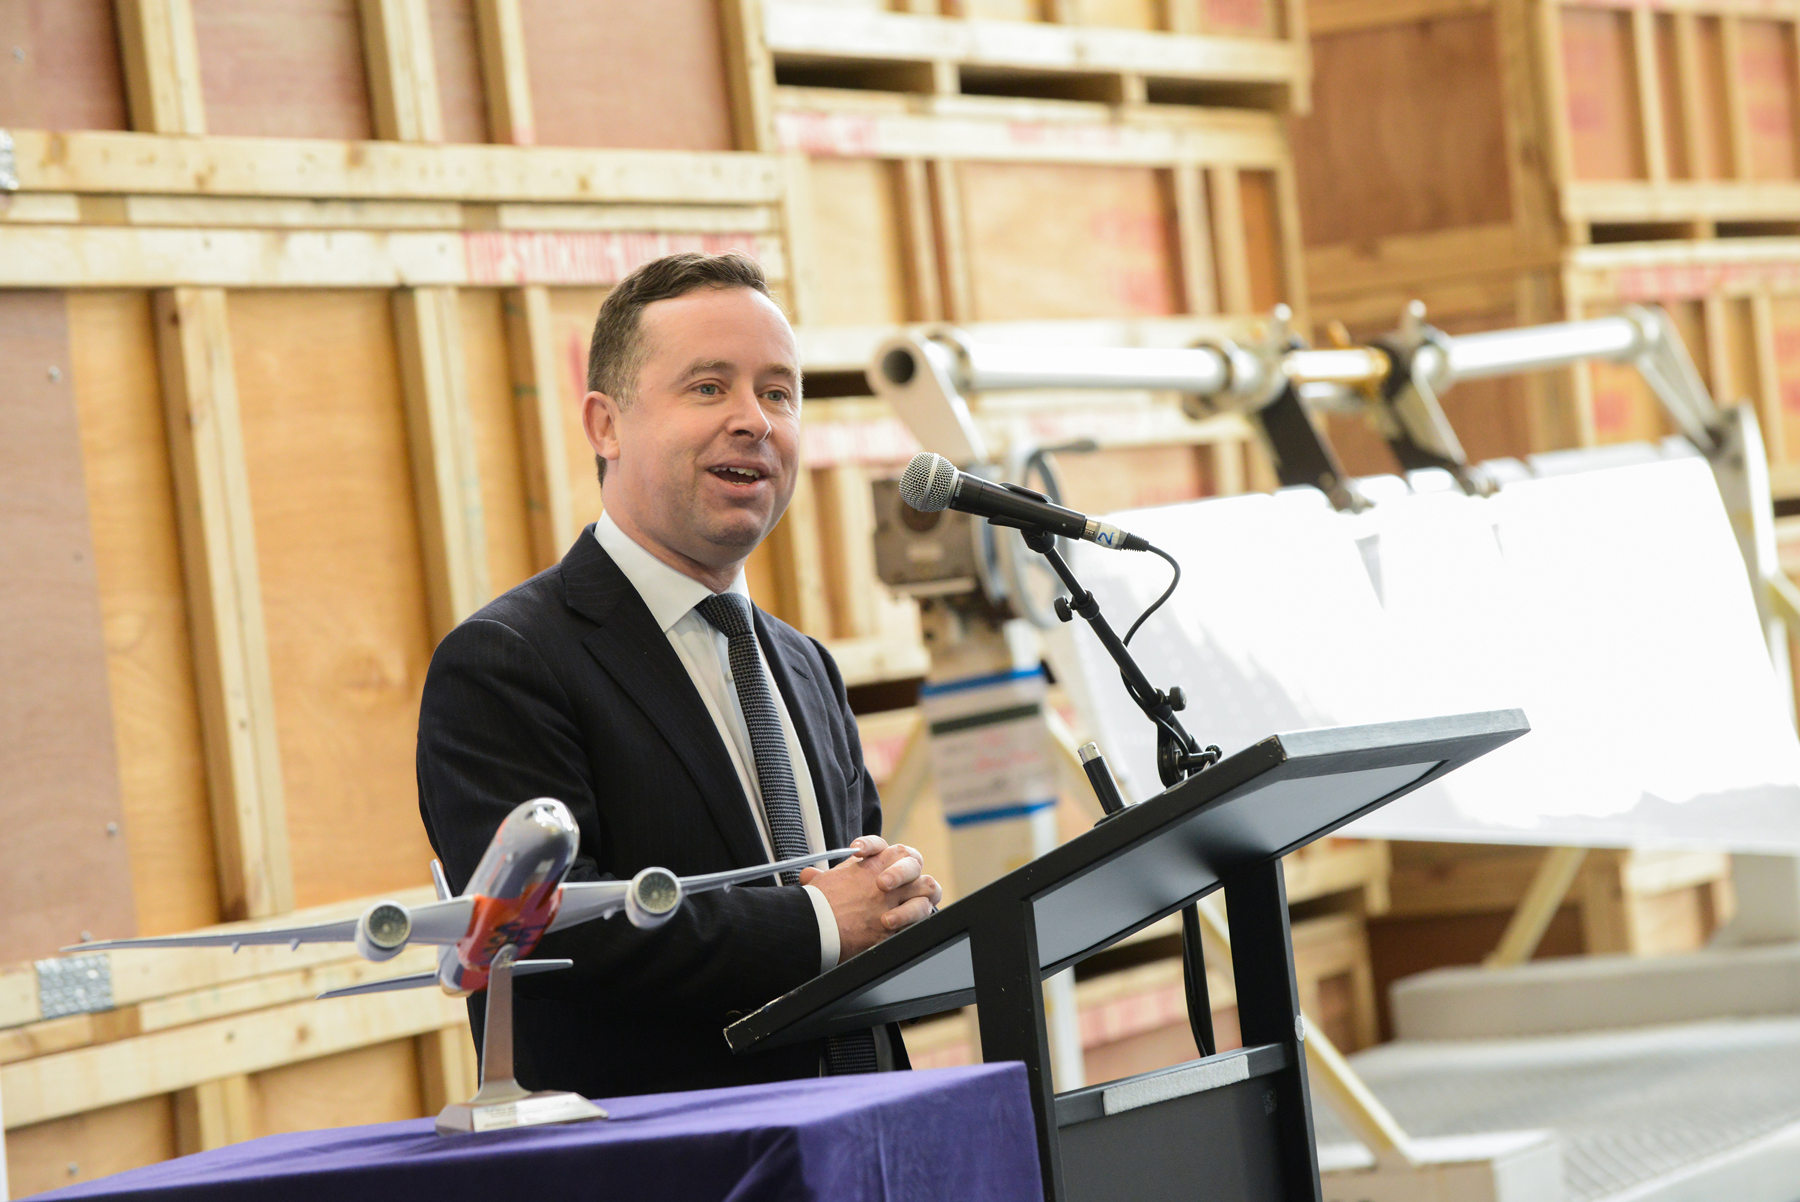 Alan Joyce steps down from Qantas two months early